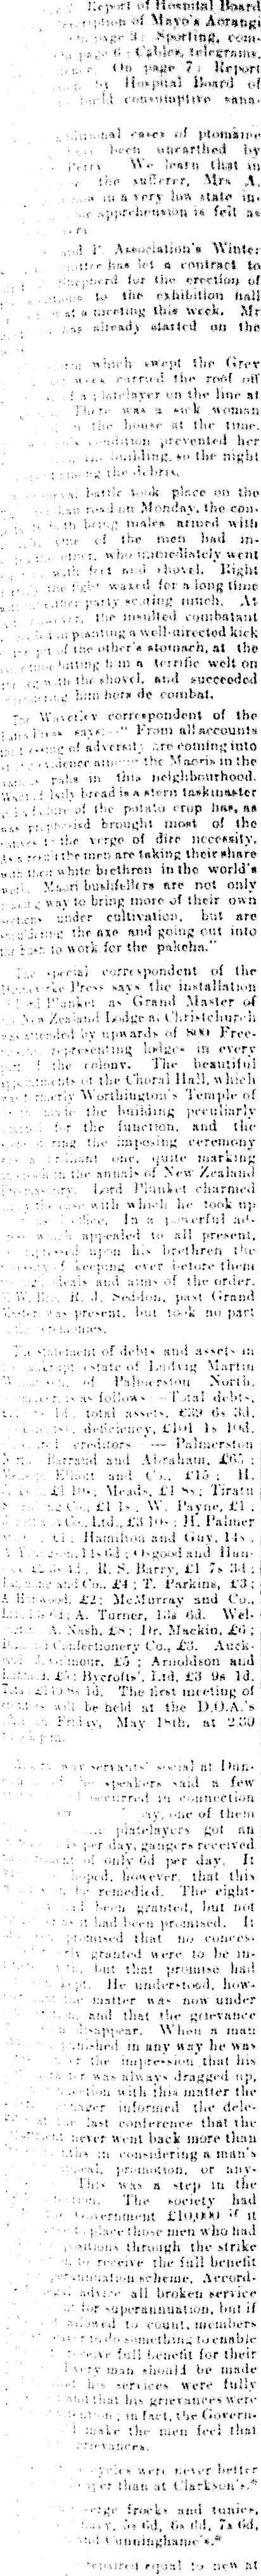 Papers Past Newspapers Manawatu Standard 11 May 1906 Untitled